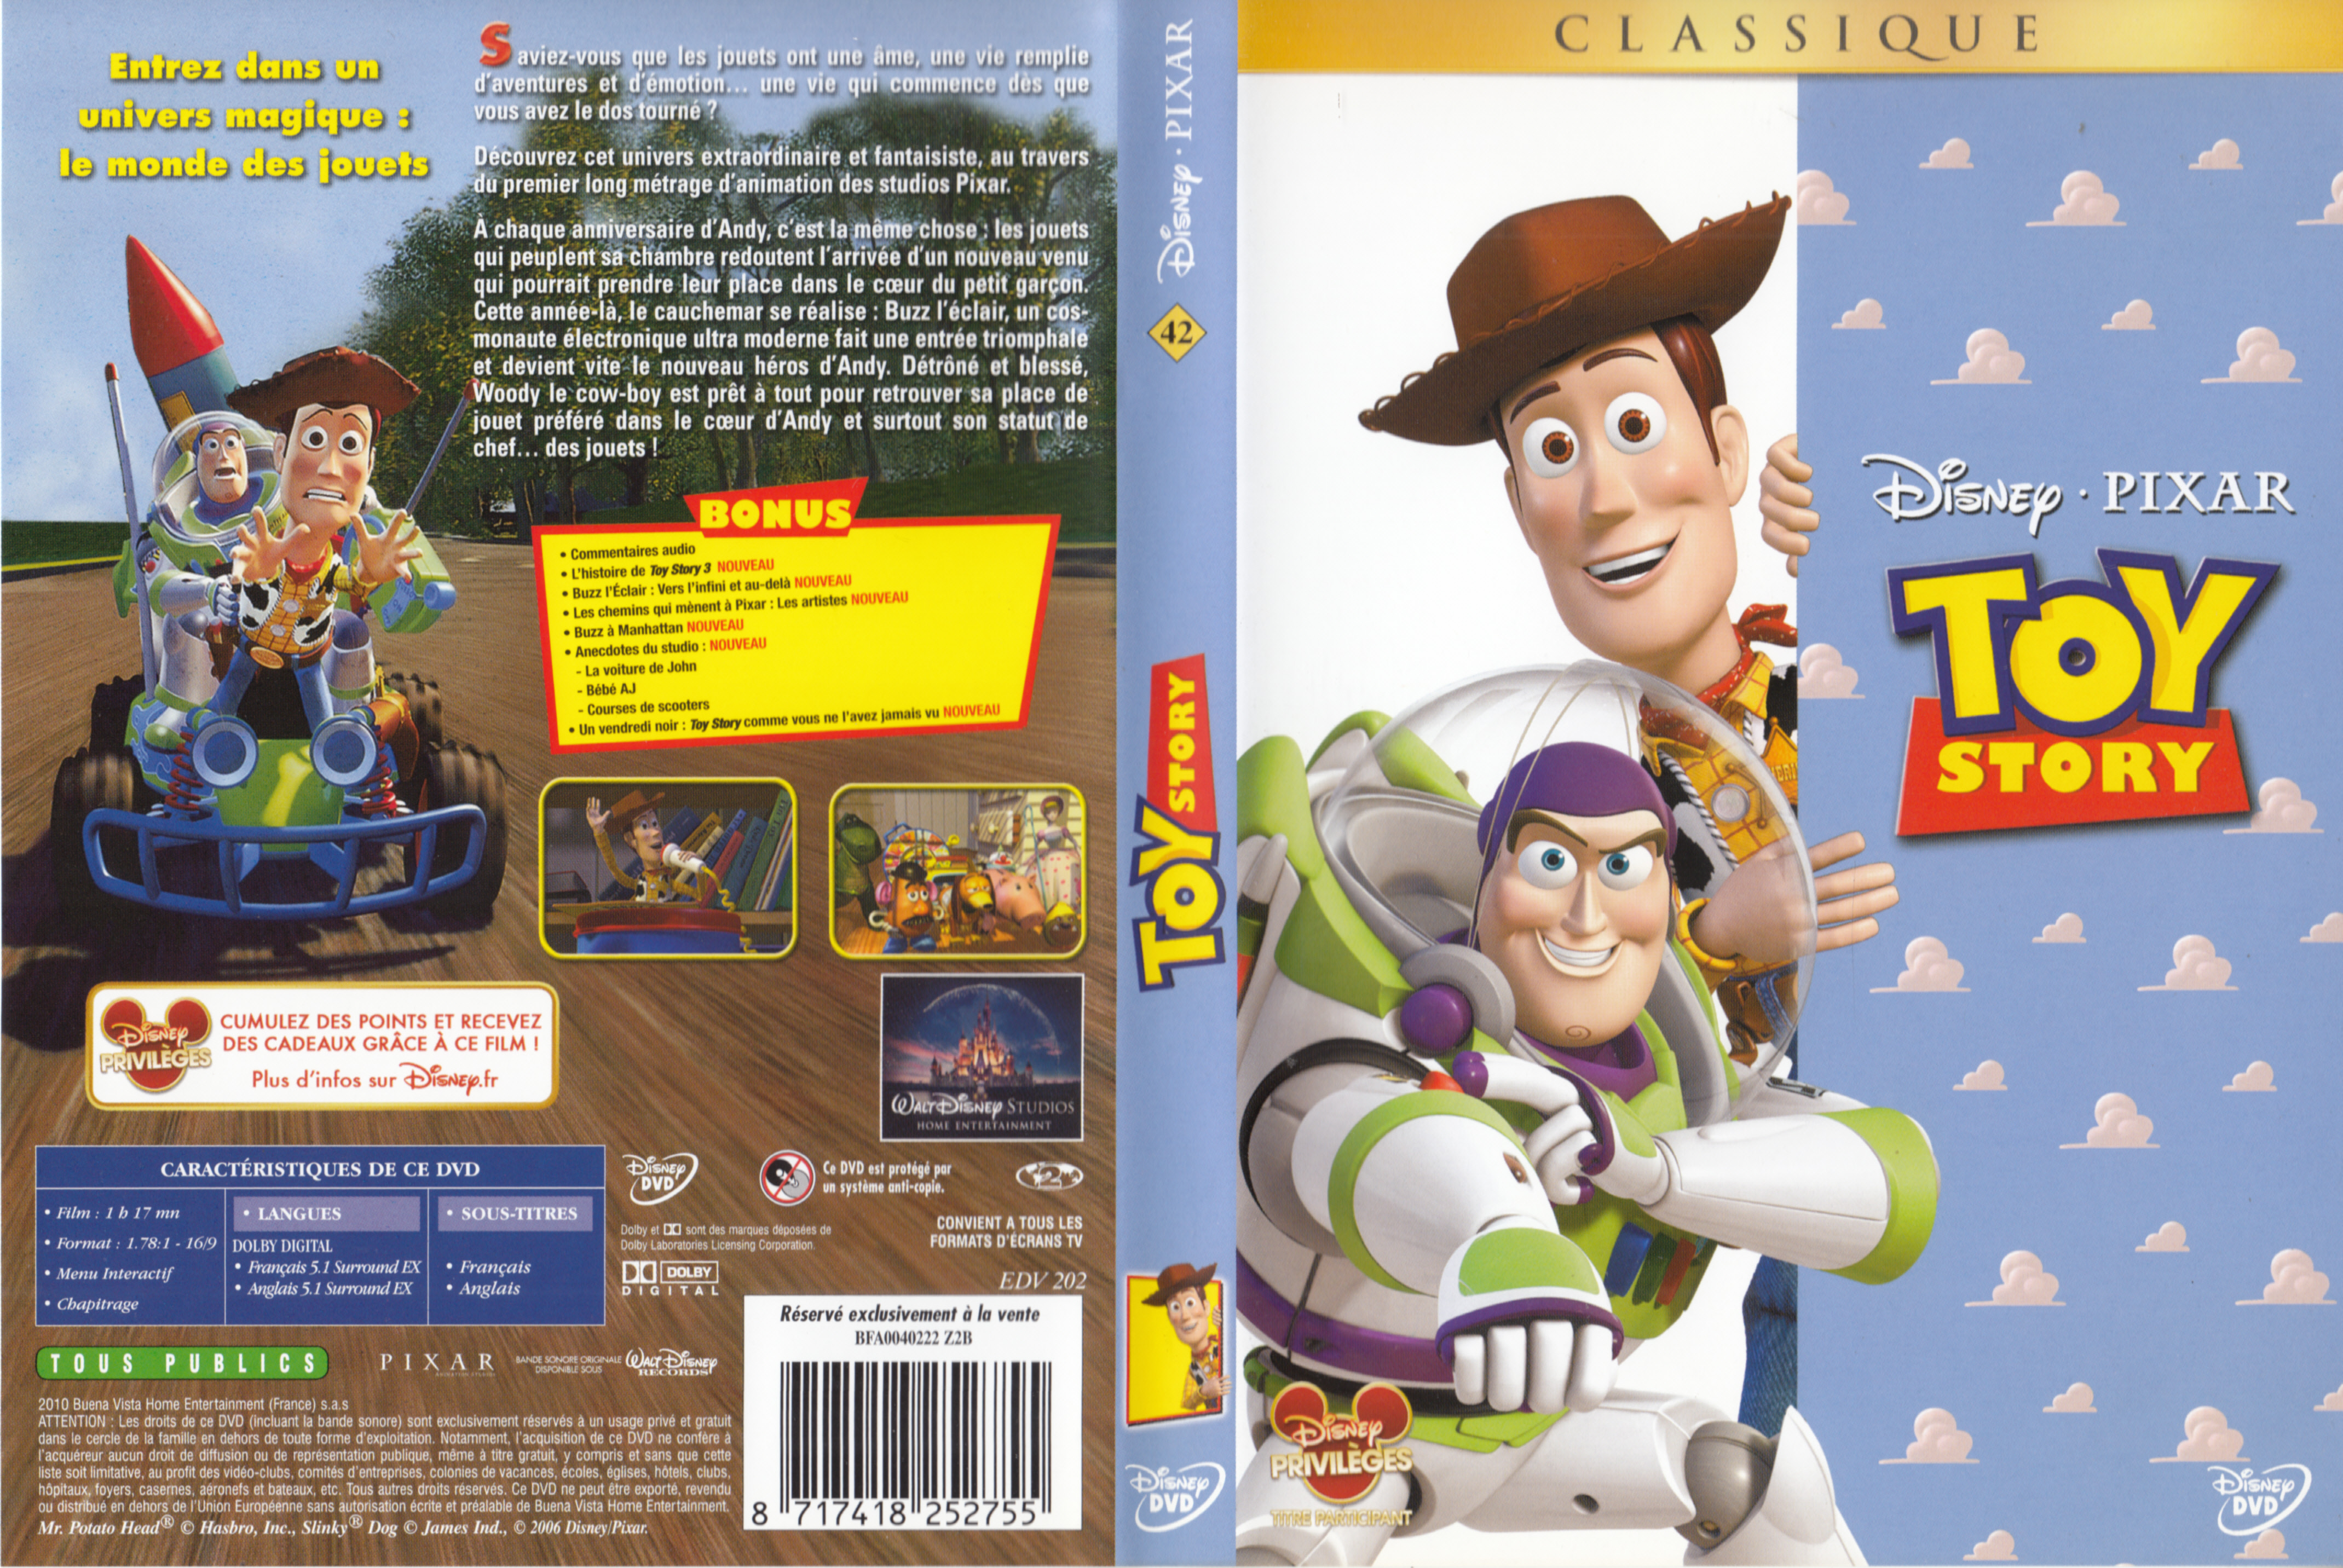 Jaquette DVD Toy Story v4